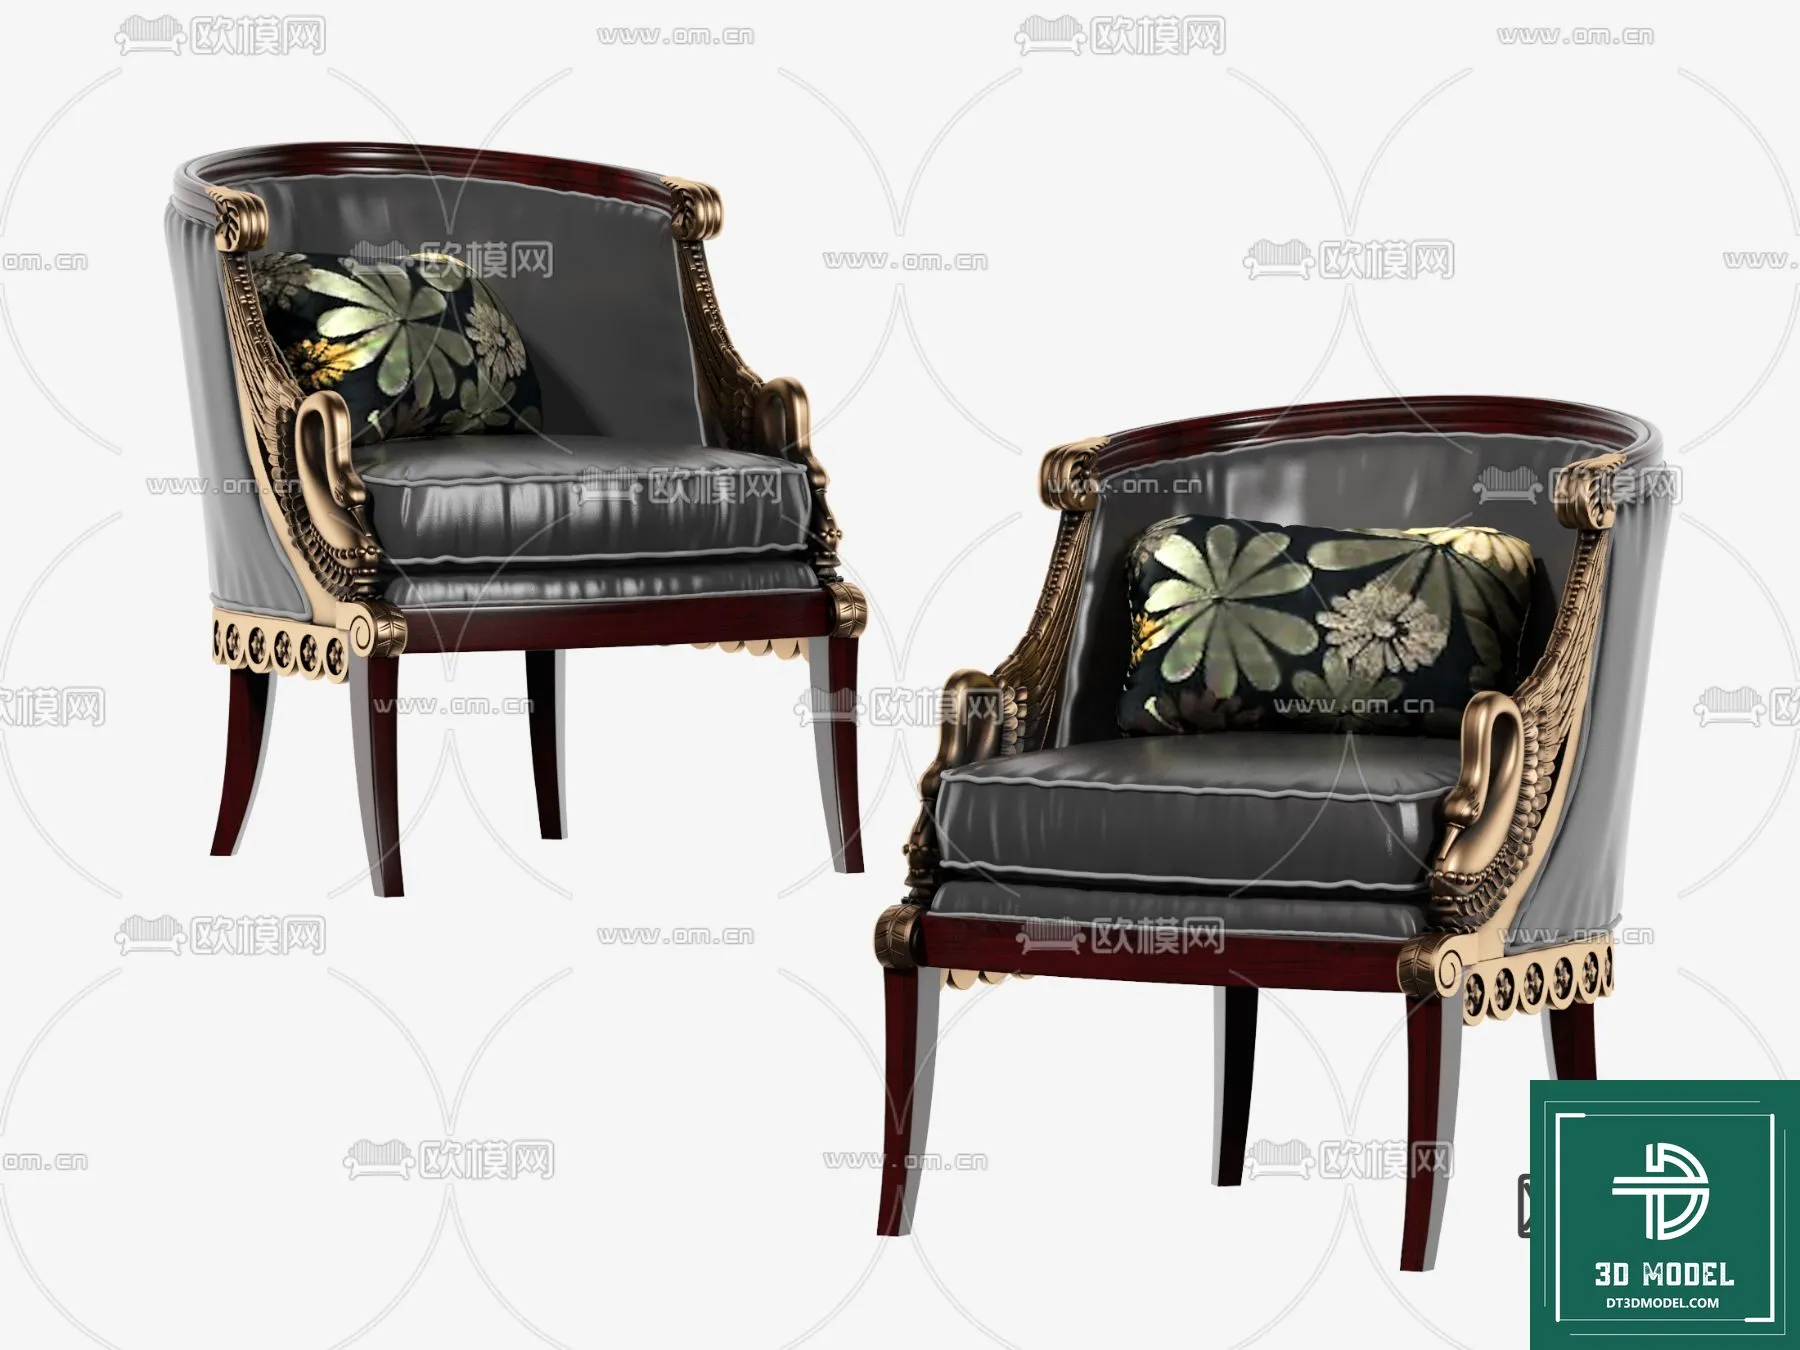 INDOCHINE STYLE – 3D MODELS – 723